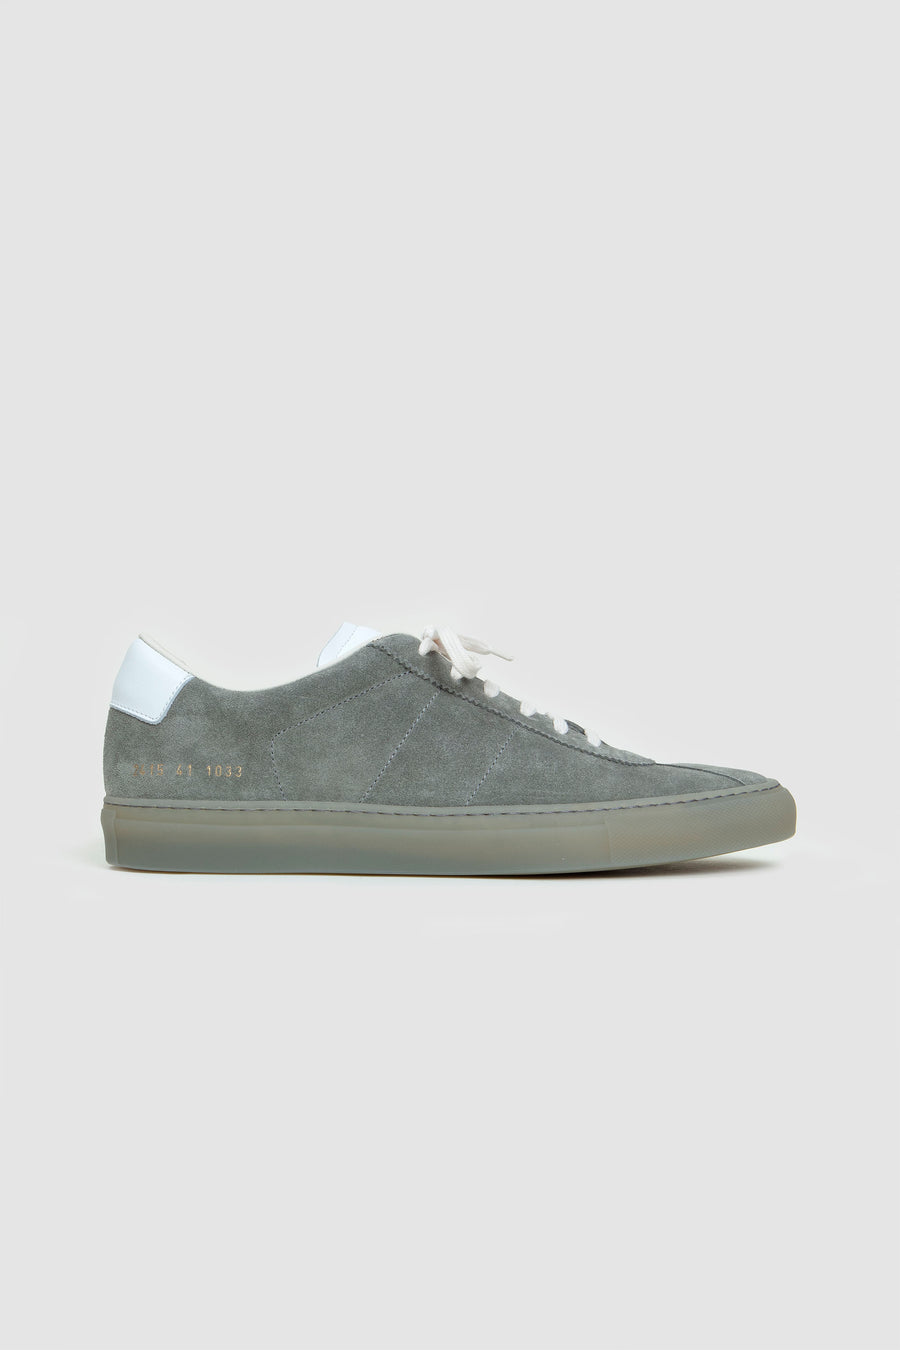 SPORTIVO [Shop, Common projects]